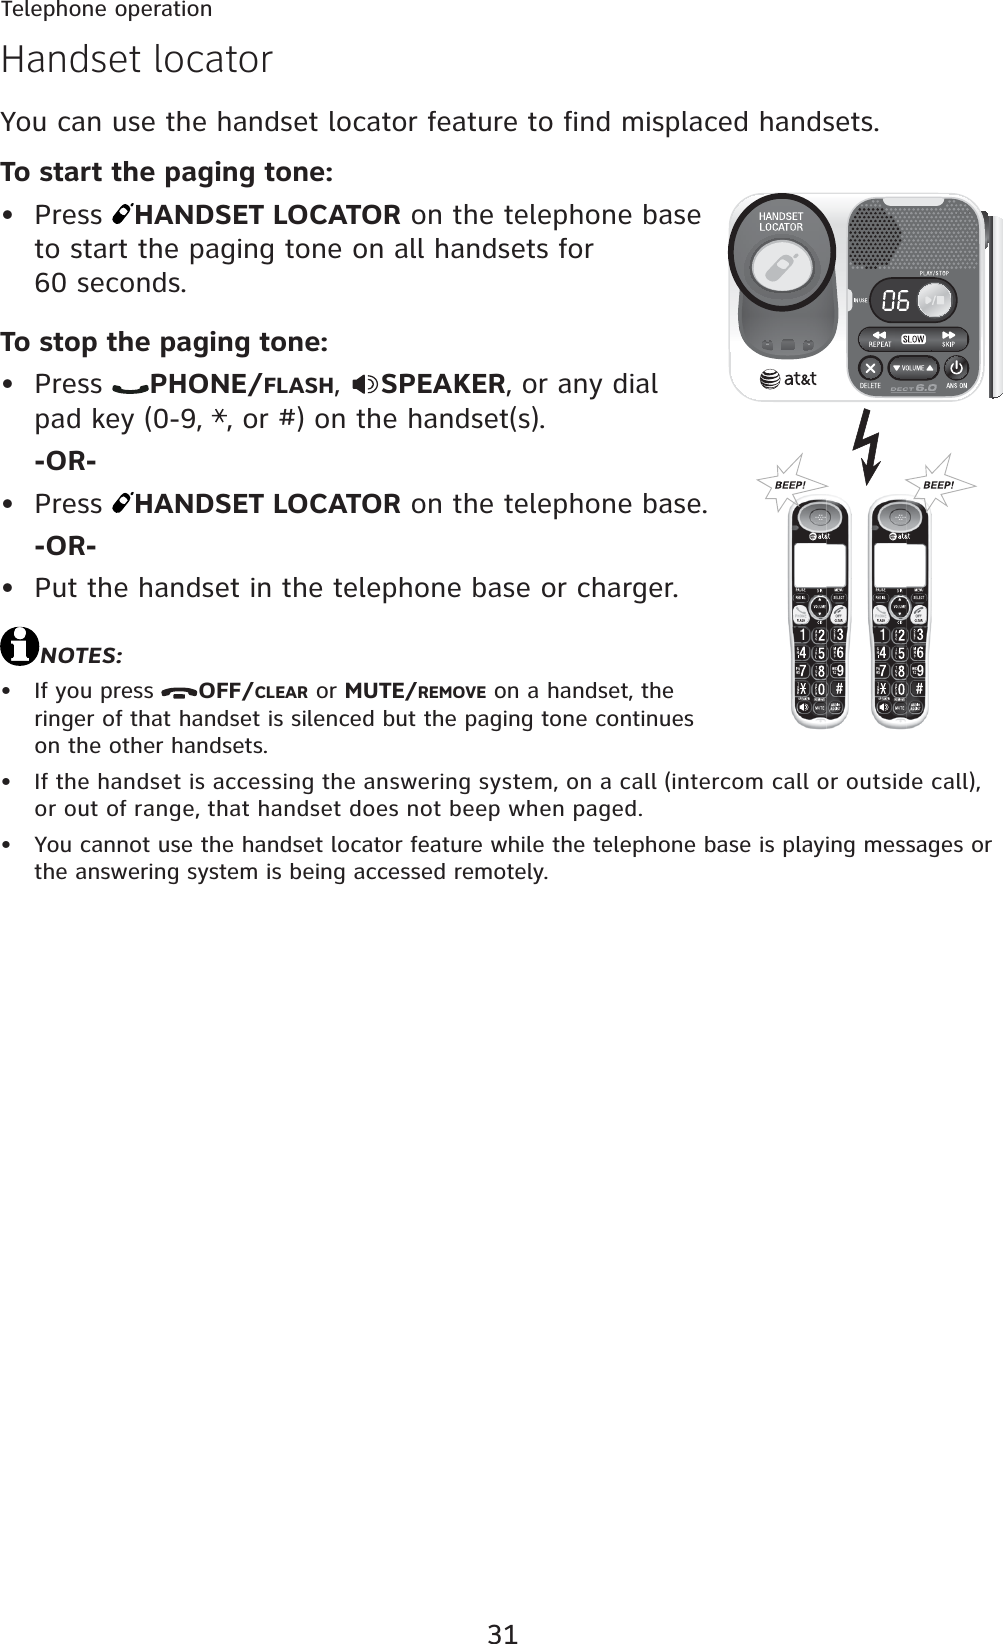 31Telephone operationYou can use the handset locator feature to find misplaced handsets.To start the paging tone:Press  HANDSET LOCATOR on the telephone base to start the paging tone on all handsets for 60 seconds.To stop the paging tone:Press  PHONE/FLASH,SPEAKER, or any dial pad key (0-9,  , or #) on the handset(s).-OR-Press  HANDSET LOCATOR on the telephone base.-OR-Put the handset in the telephone base or charger.NOTES:If you press  OFF/CLEAR or MUTE/REMOVE on a handset, the ringer of that handset is silenced but the paging tone continues on the other handsets.If the handset is accessing the answering system, on a call (intercom call or outside call), or out of range, that handset does not beep when paged.You cannot use the handset locator feature while the telephone base is playing messages or the answering system is being accessed remotely.•••••••Handset locator